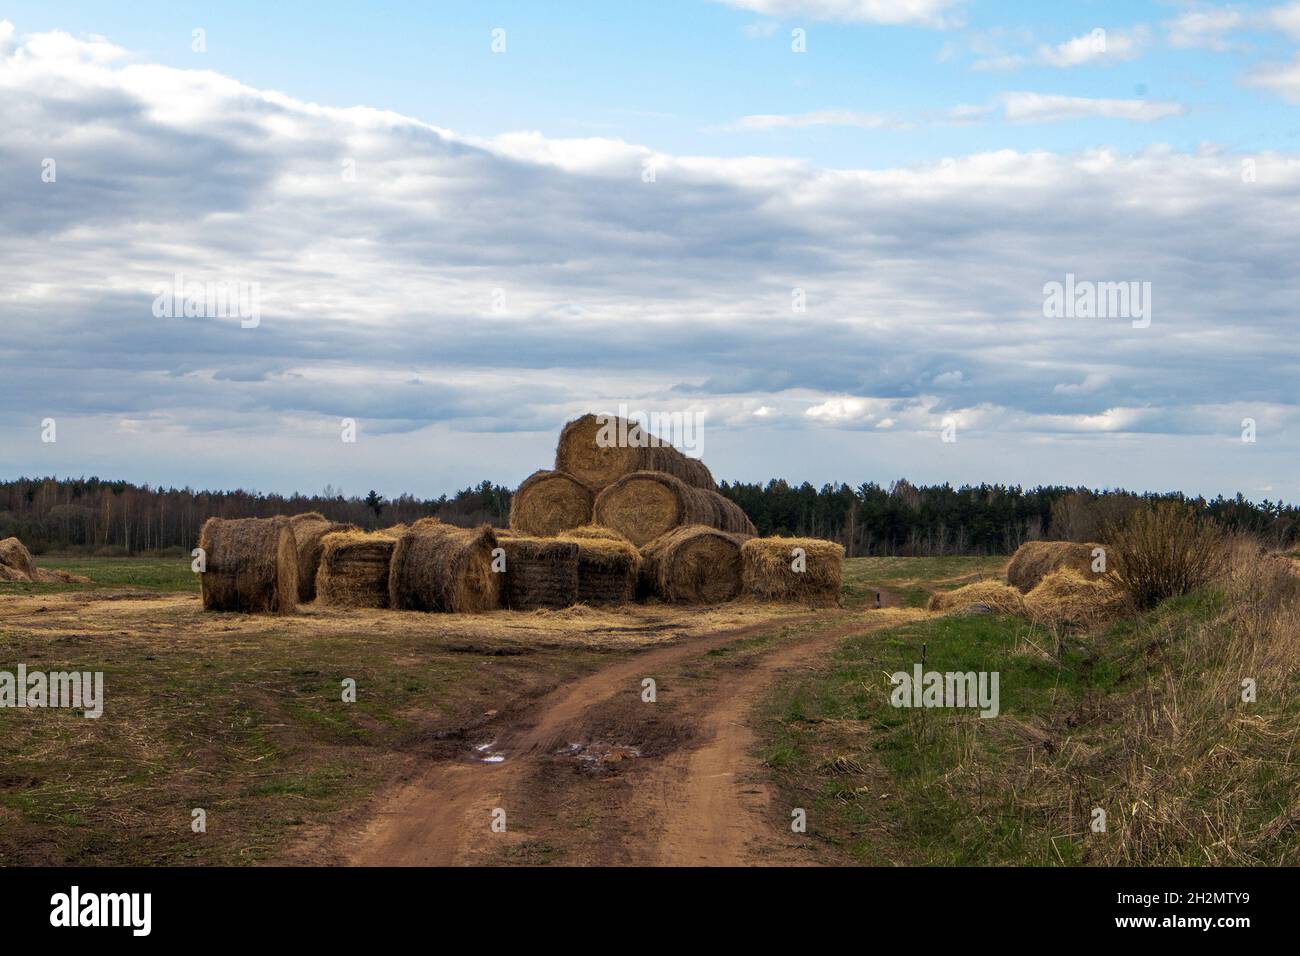 A pile of straw bales lying close to the sandy road against cloudy sky Stock Photo